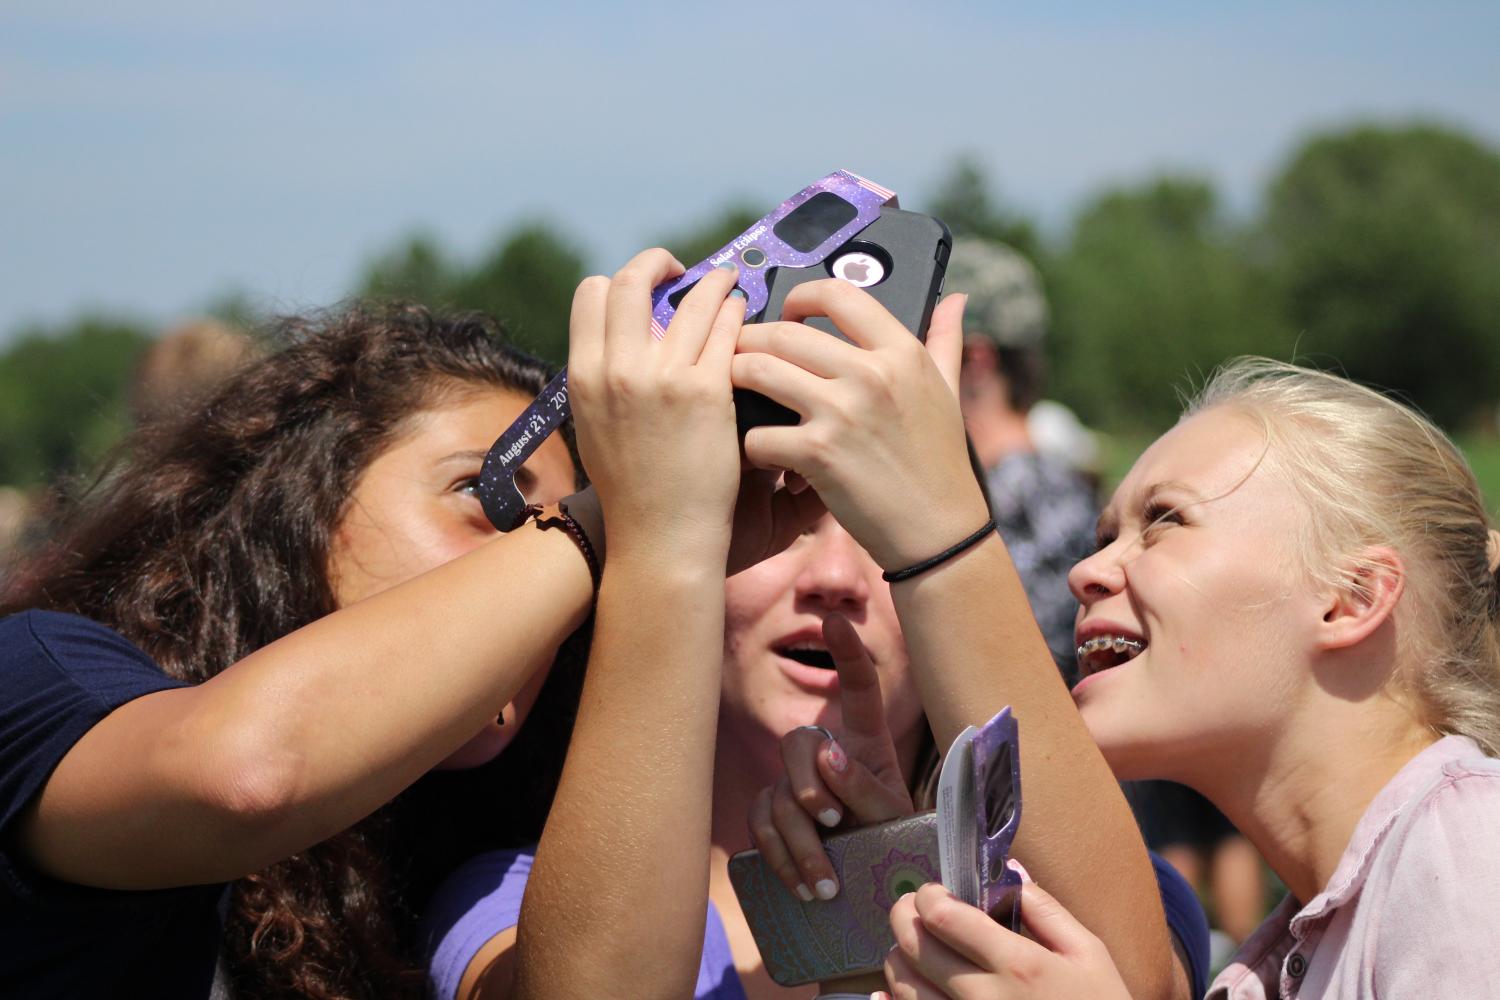 Students+taking+photo+on+iphone+through+solar+eclipse+glasses.